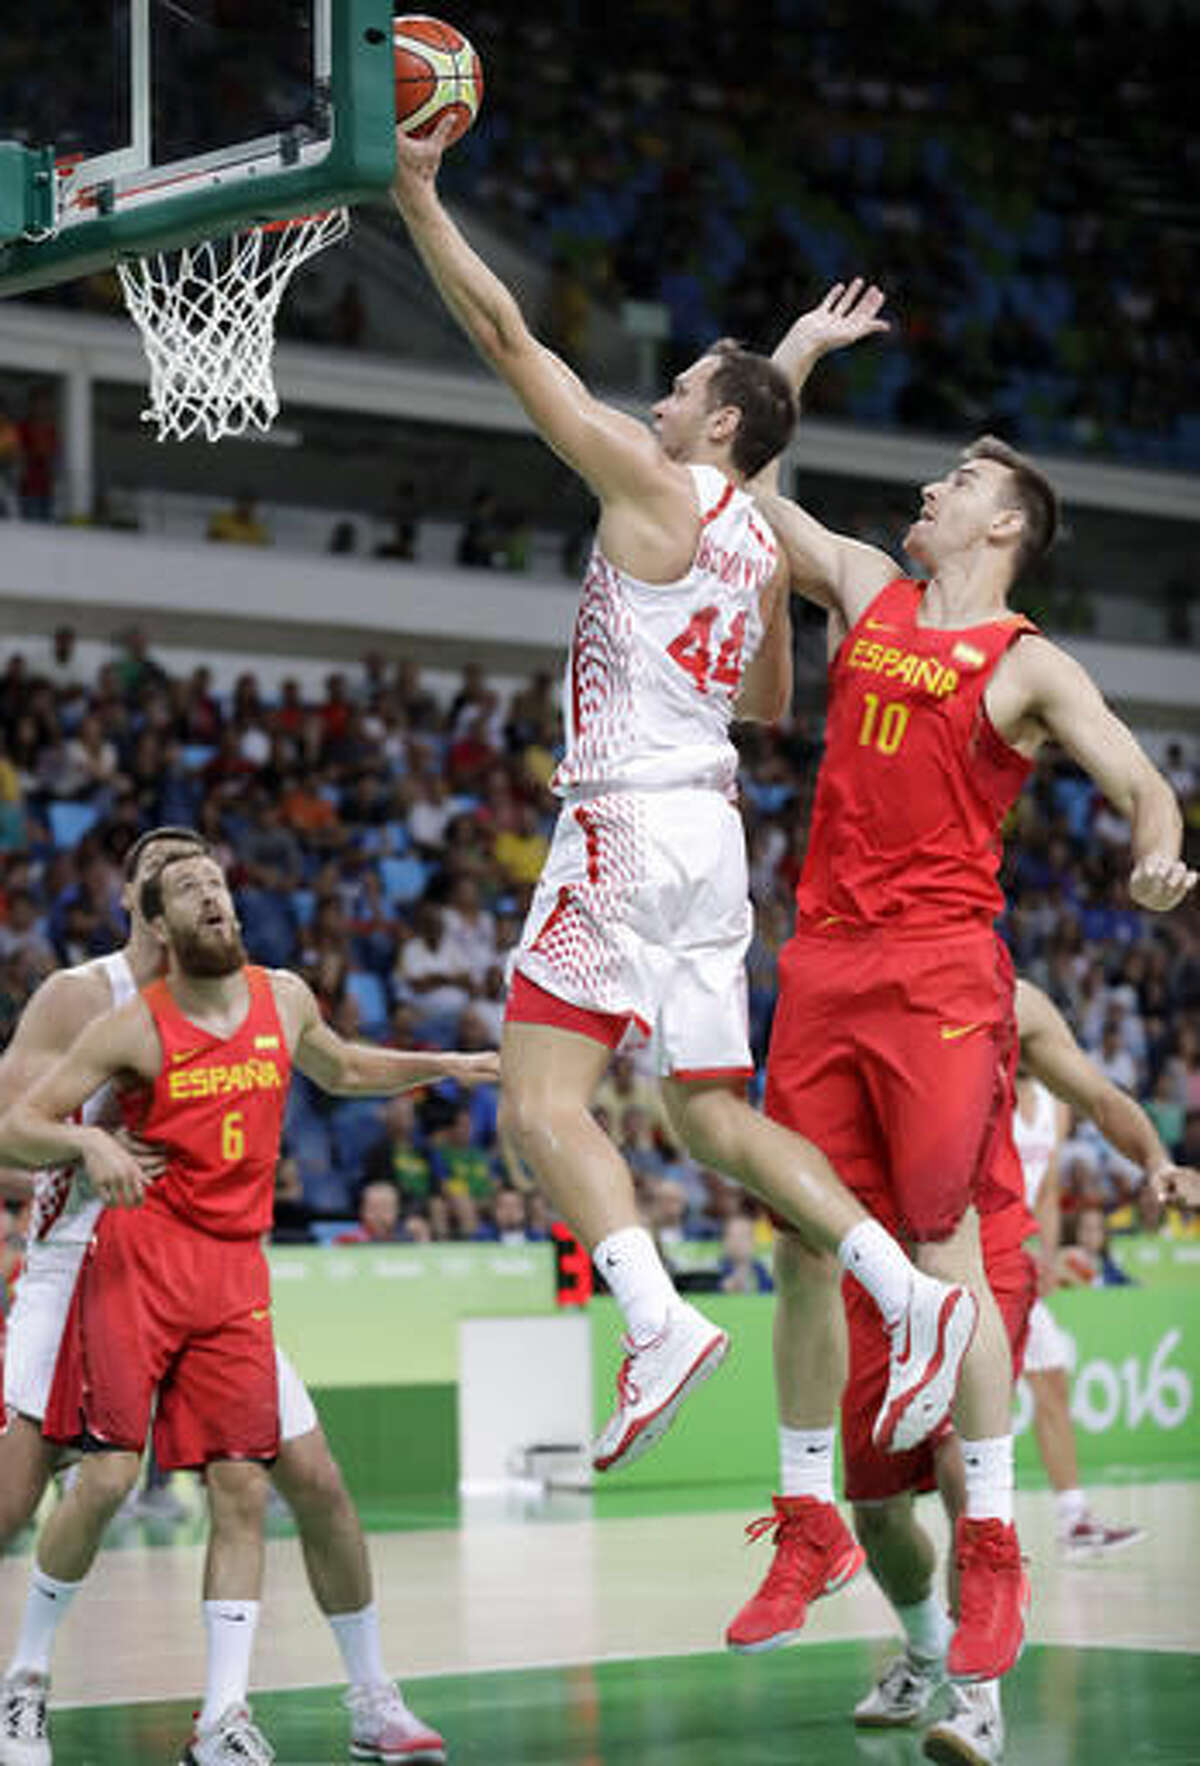 Croatia's Bojan Bogdanovic (44) drives to the basket past Spain's Victor Claver (10) during a basketball game at the 2016 Summer Olympics in Rio de Janeiro, Brazil, Sunday, Aug. 7, 2016. (AP Photo/Charlie Neibergall)